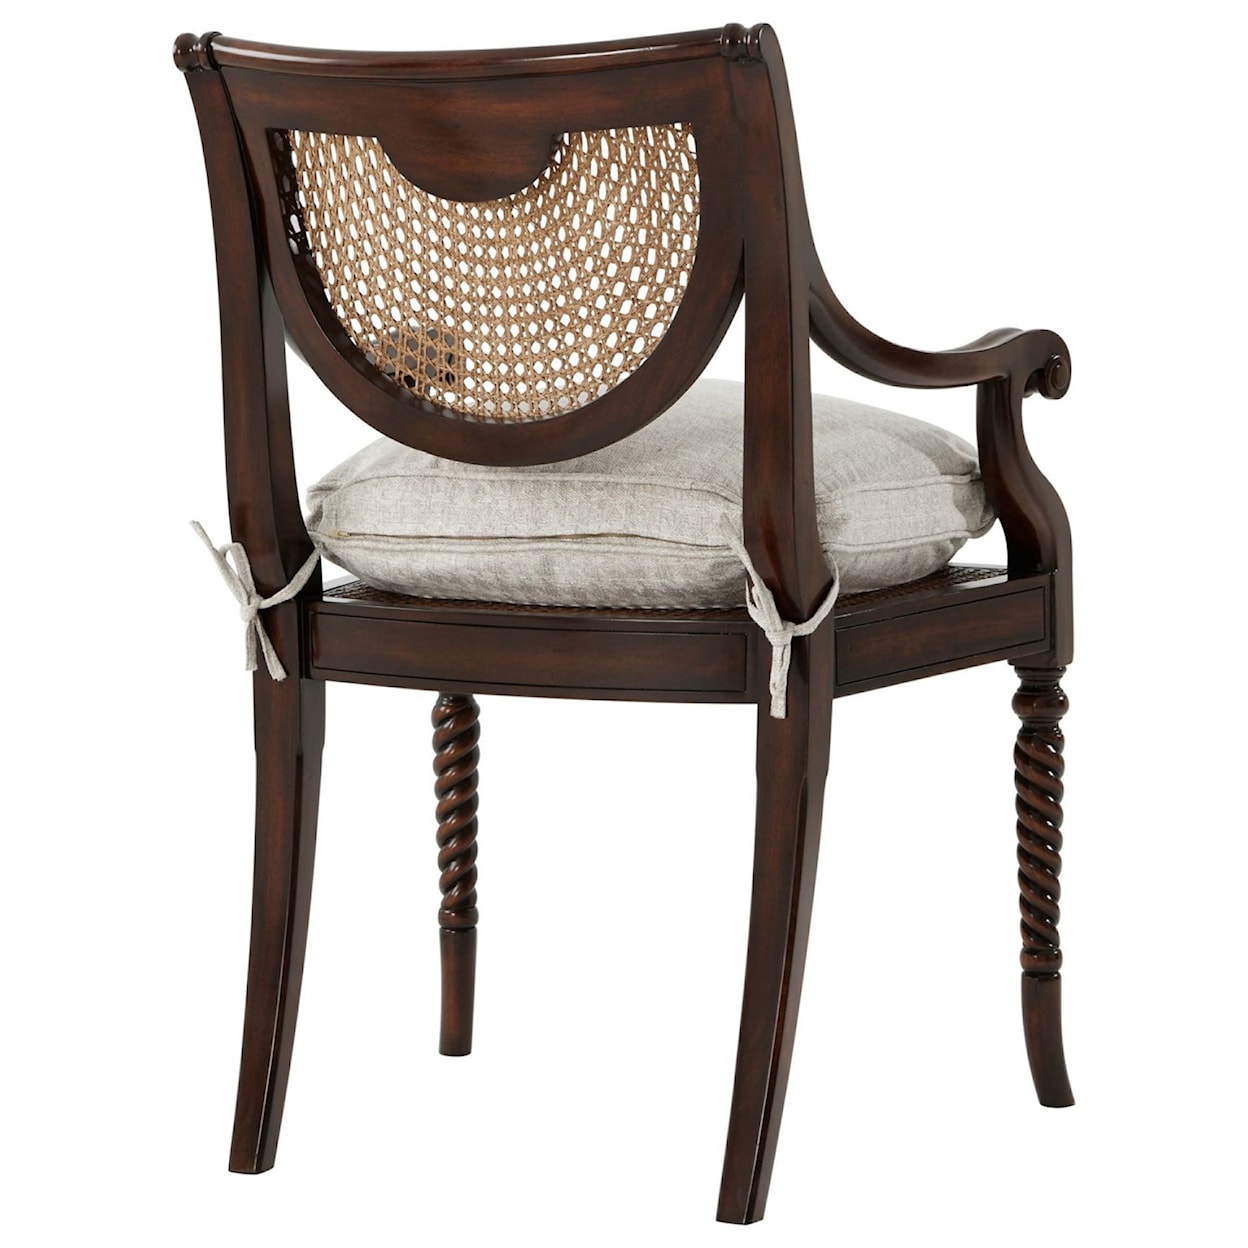 Theodore Alexander Seating Lady Emily's Favorite Armchair